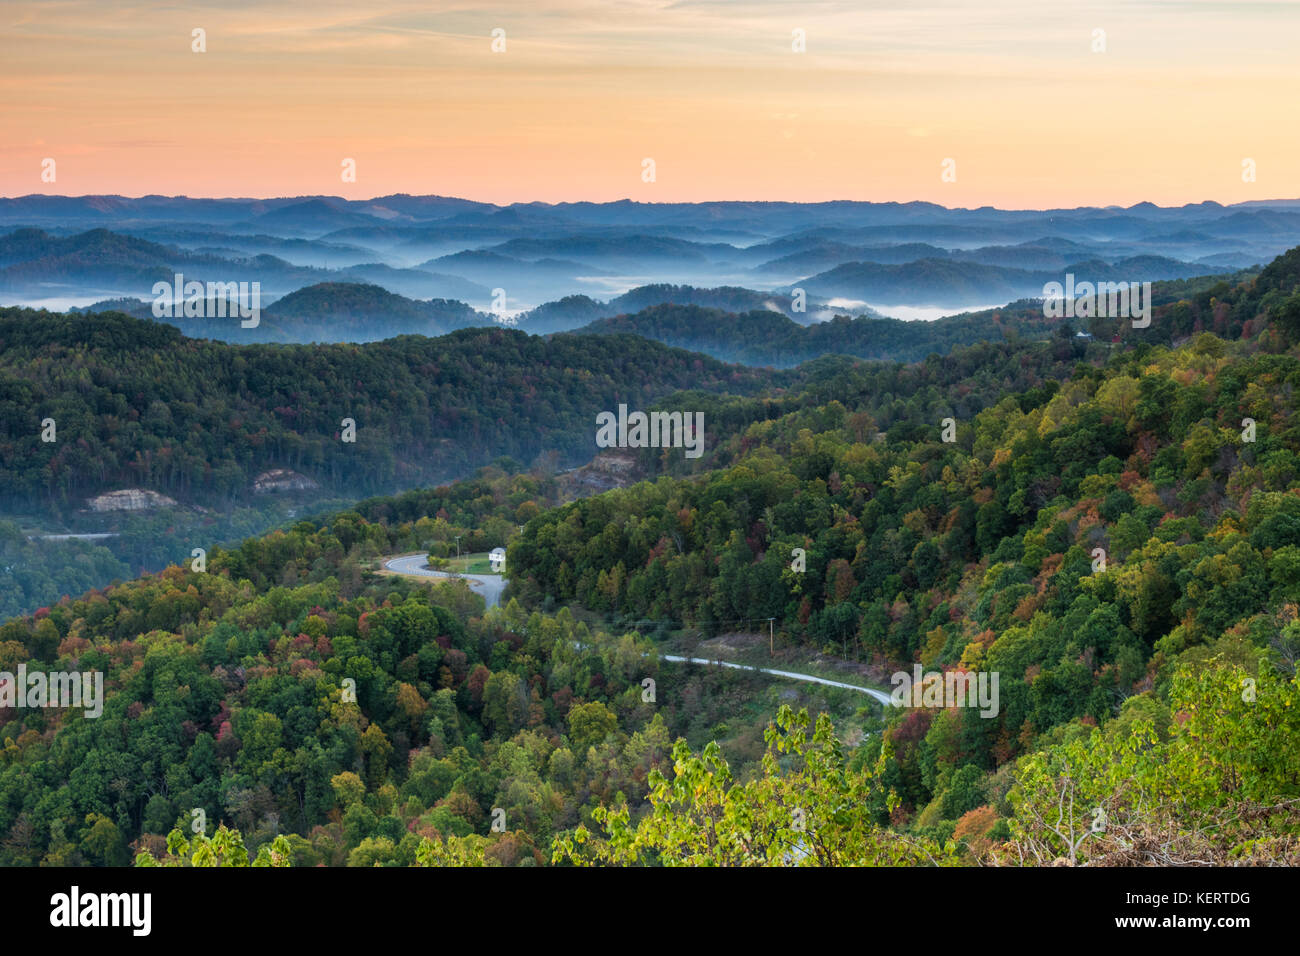 A road winds through an Appalachian forest in early autumn. Stock Photo